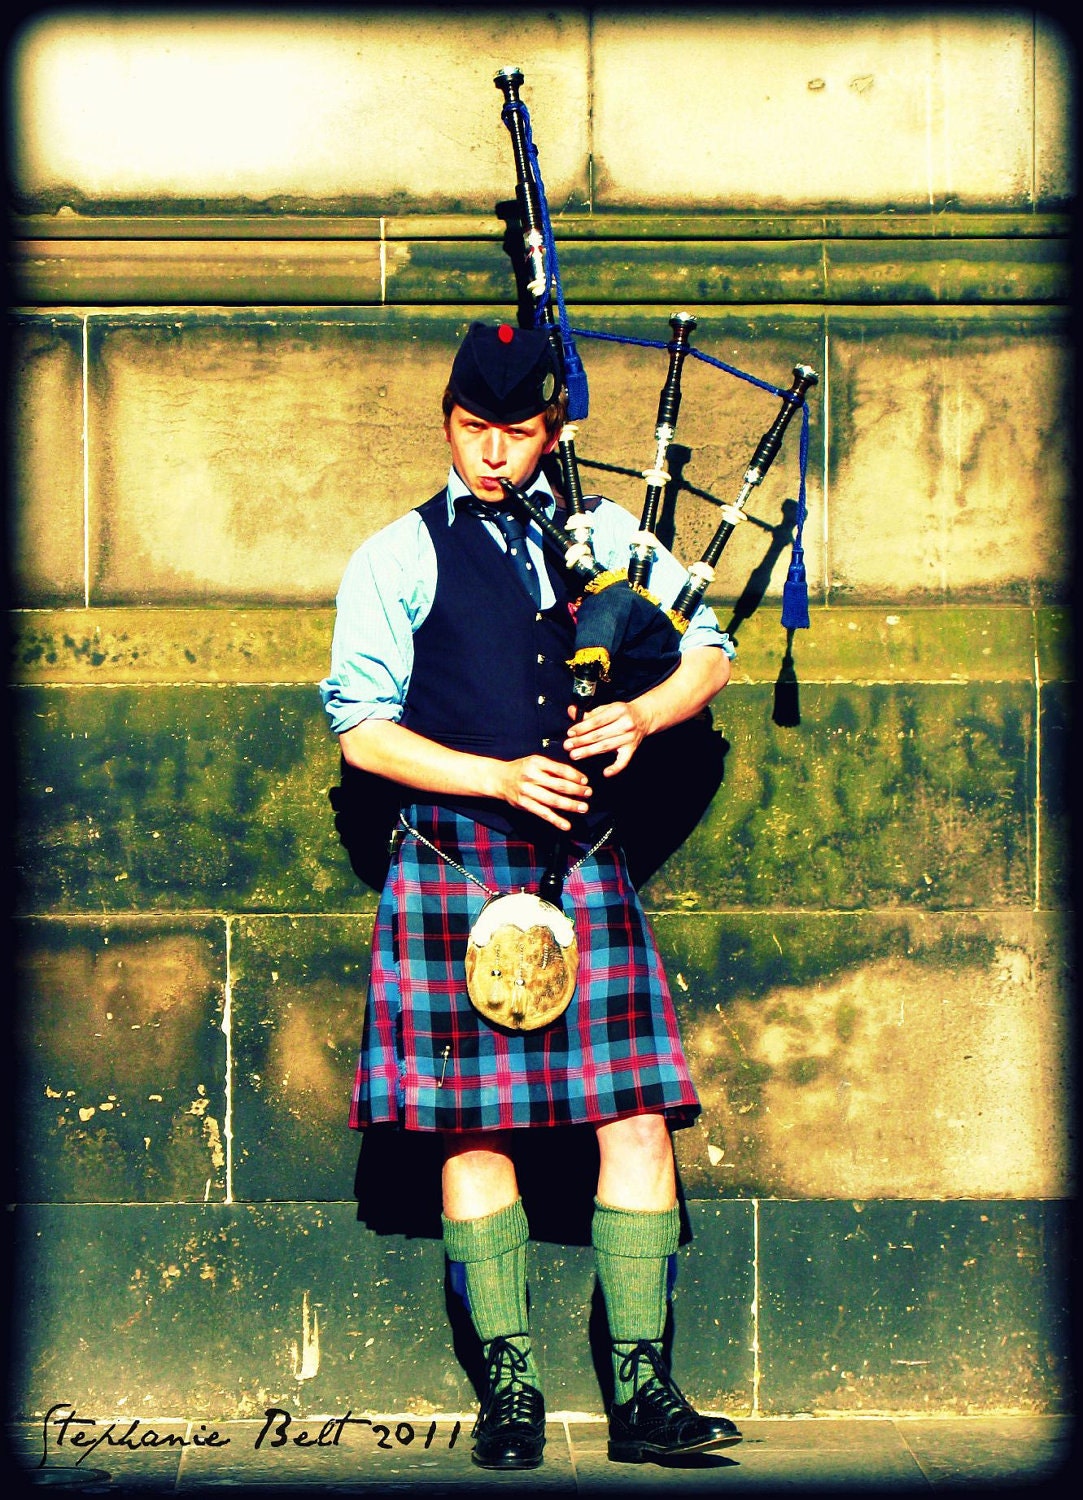 bagpipe player from austraila